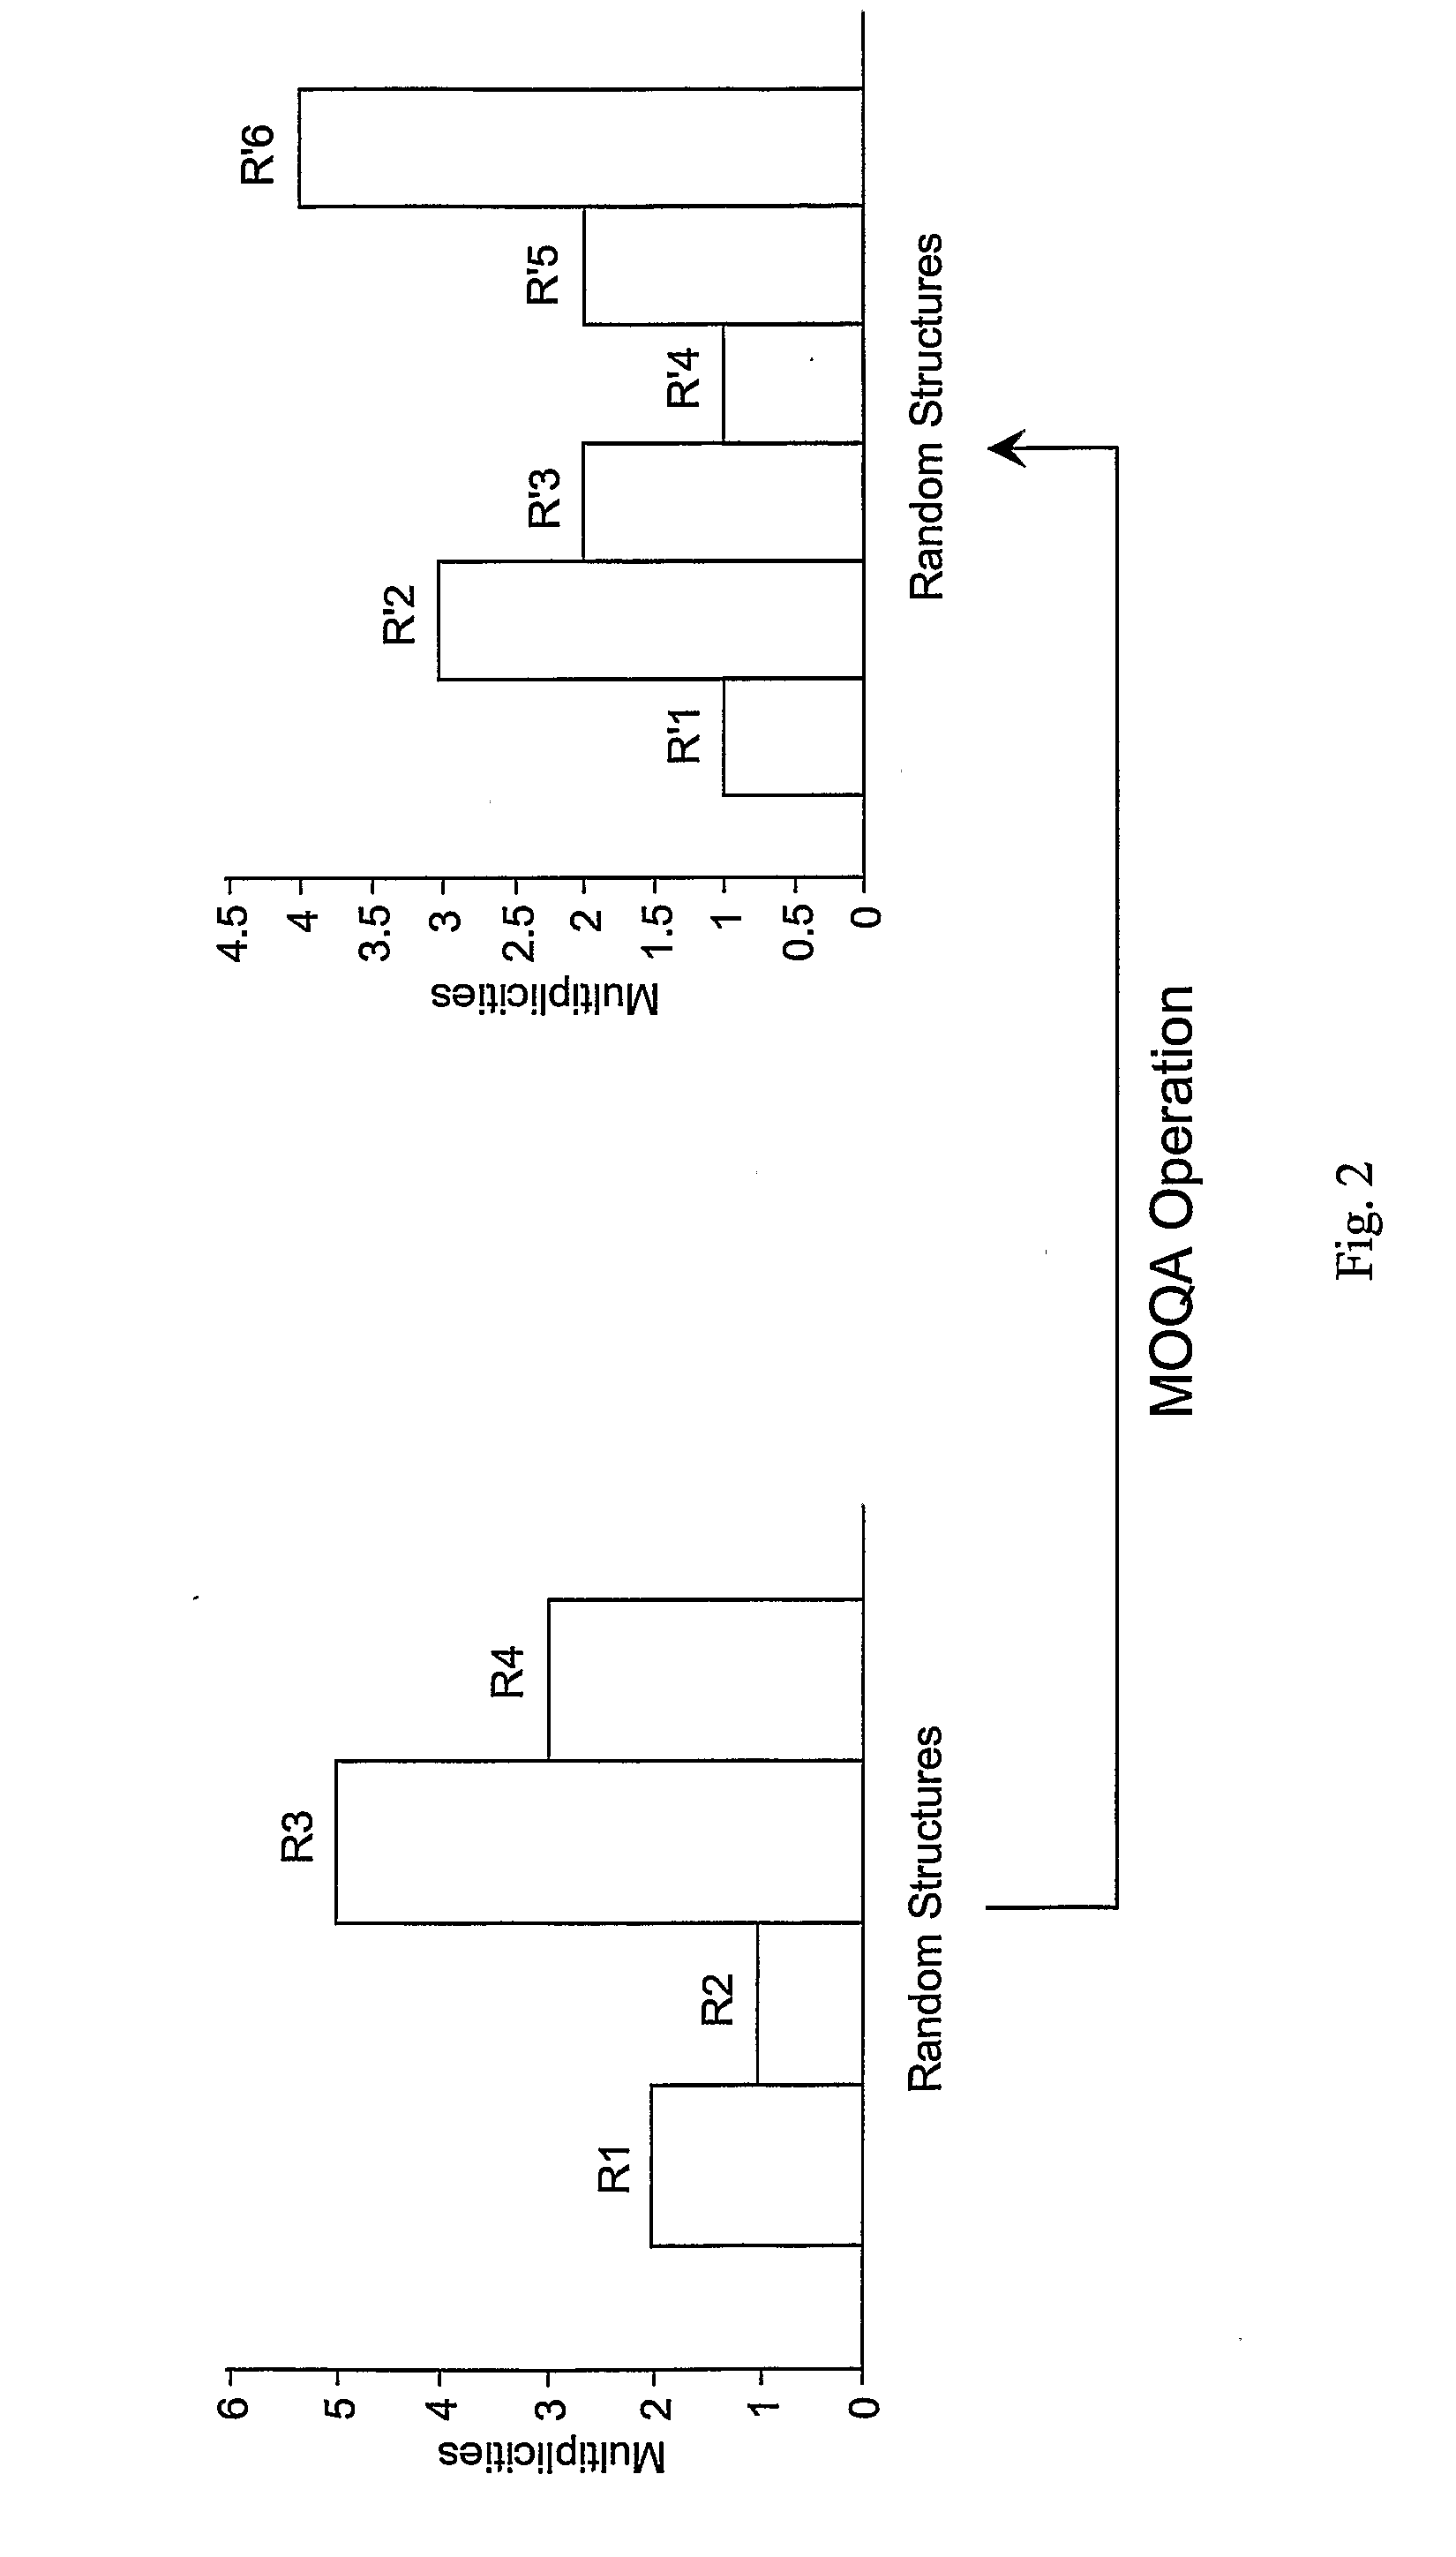 Method For Developing Software Code and Estimating Processor Execution Time